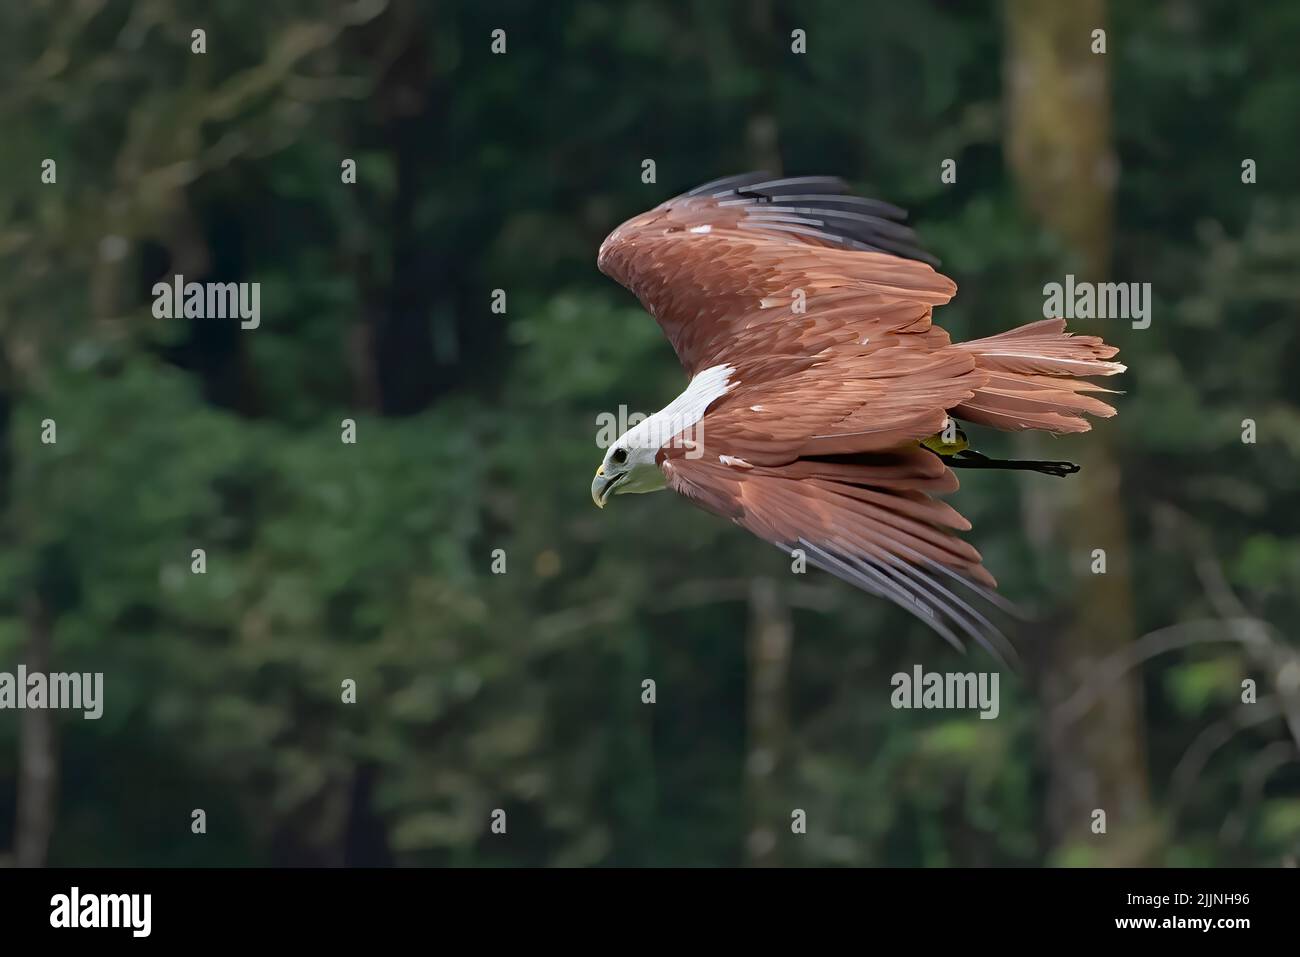 Brahminy kite in flight in a forest, Indonesia Stock Photo